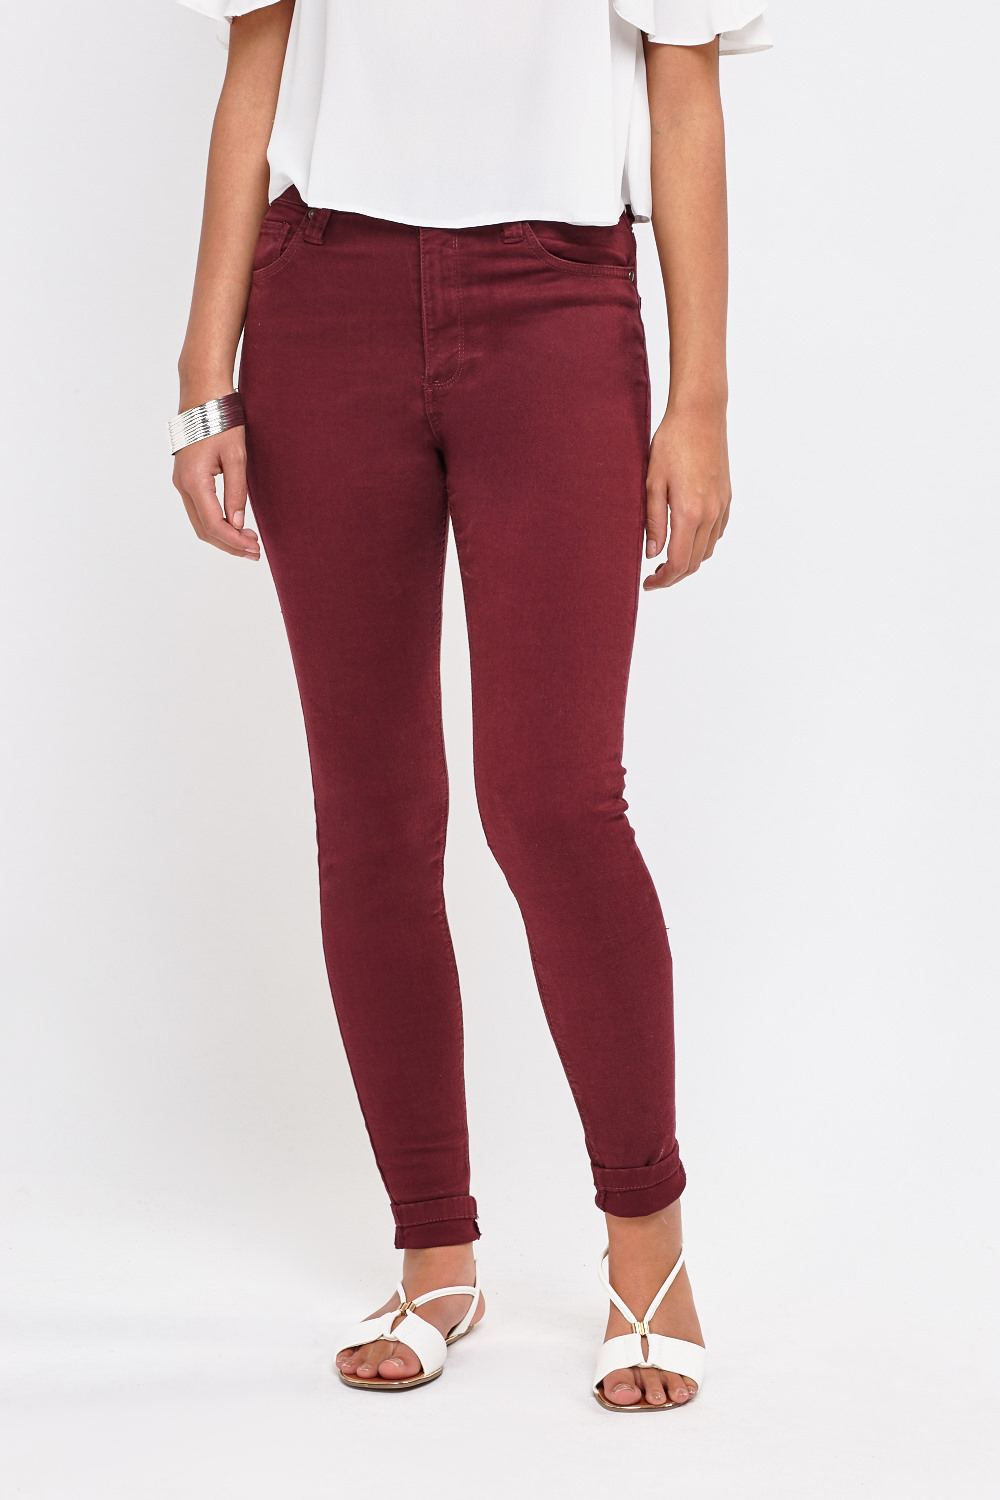 Good and low waist skinny jeans h&m